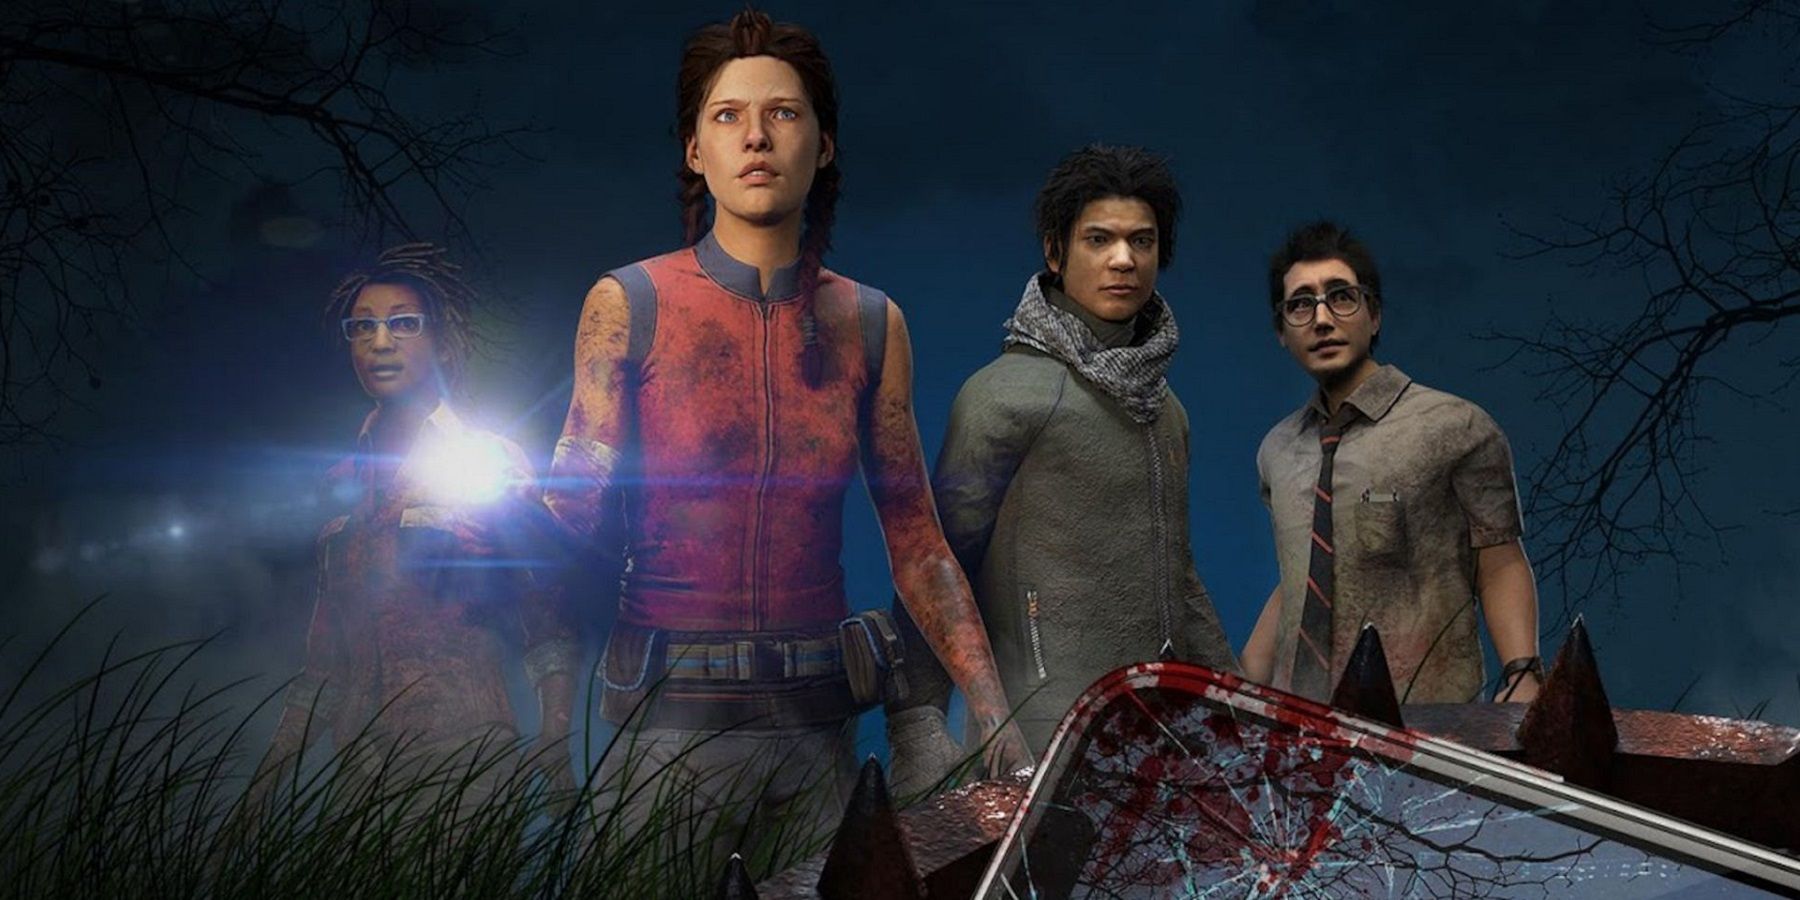 An image from Dead by Daylight showing a group of playable characters.